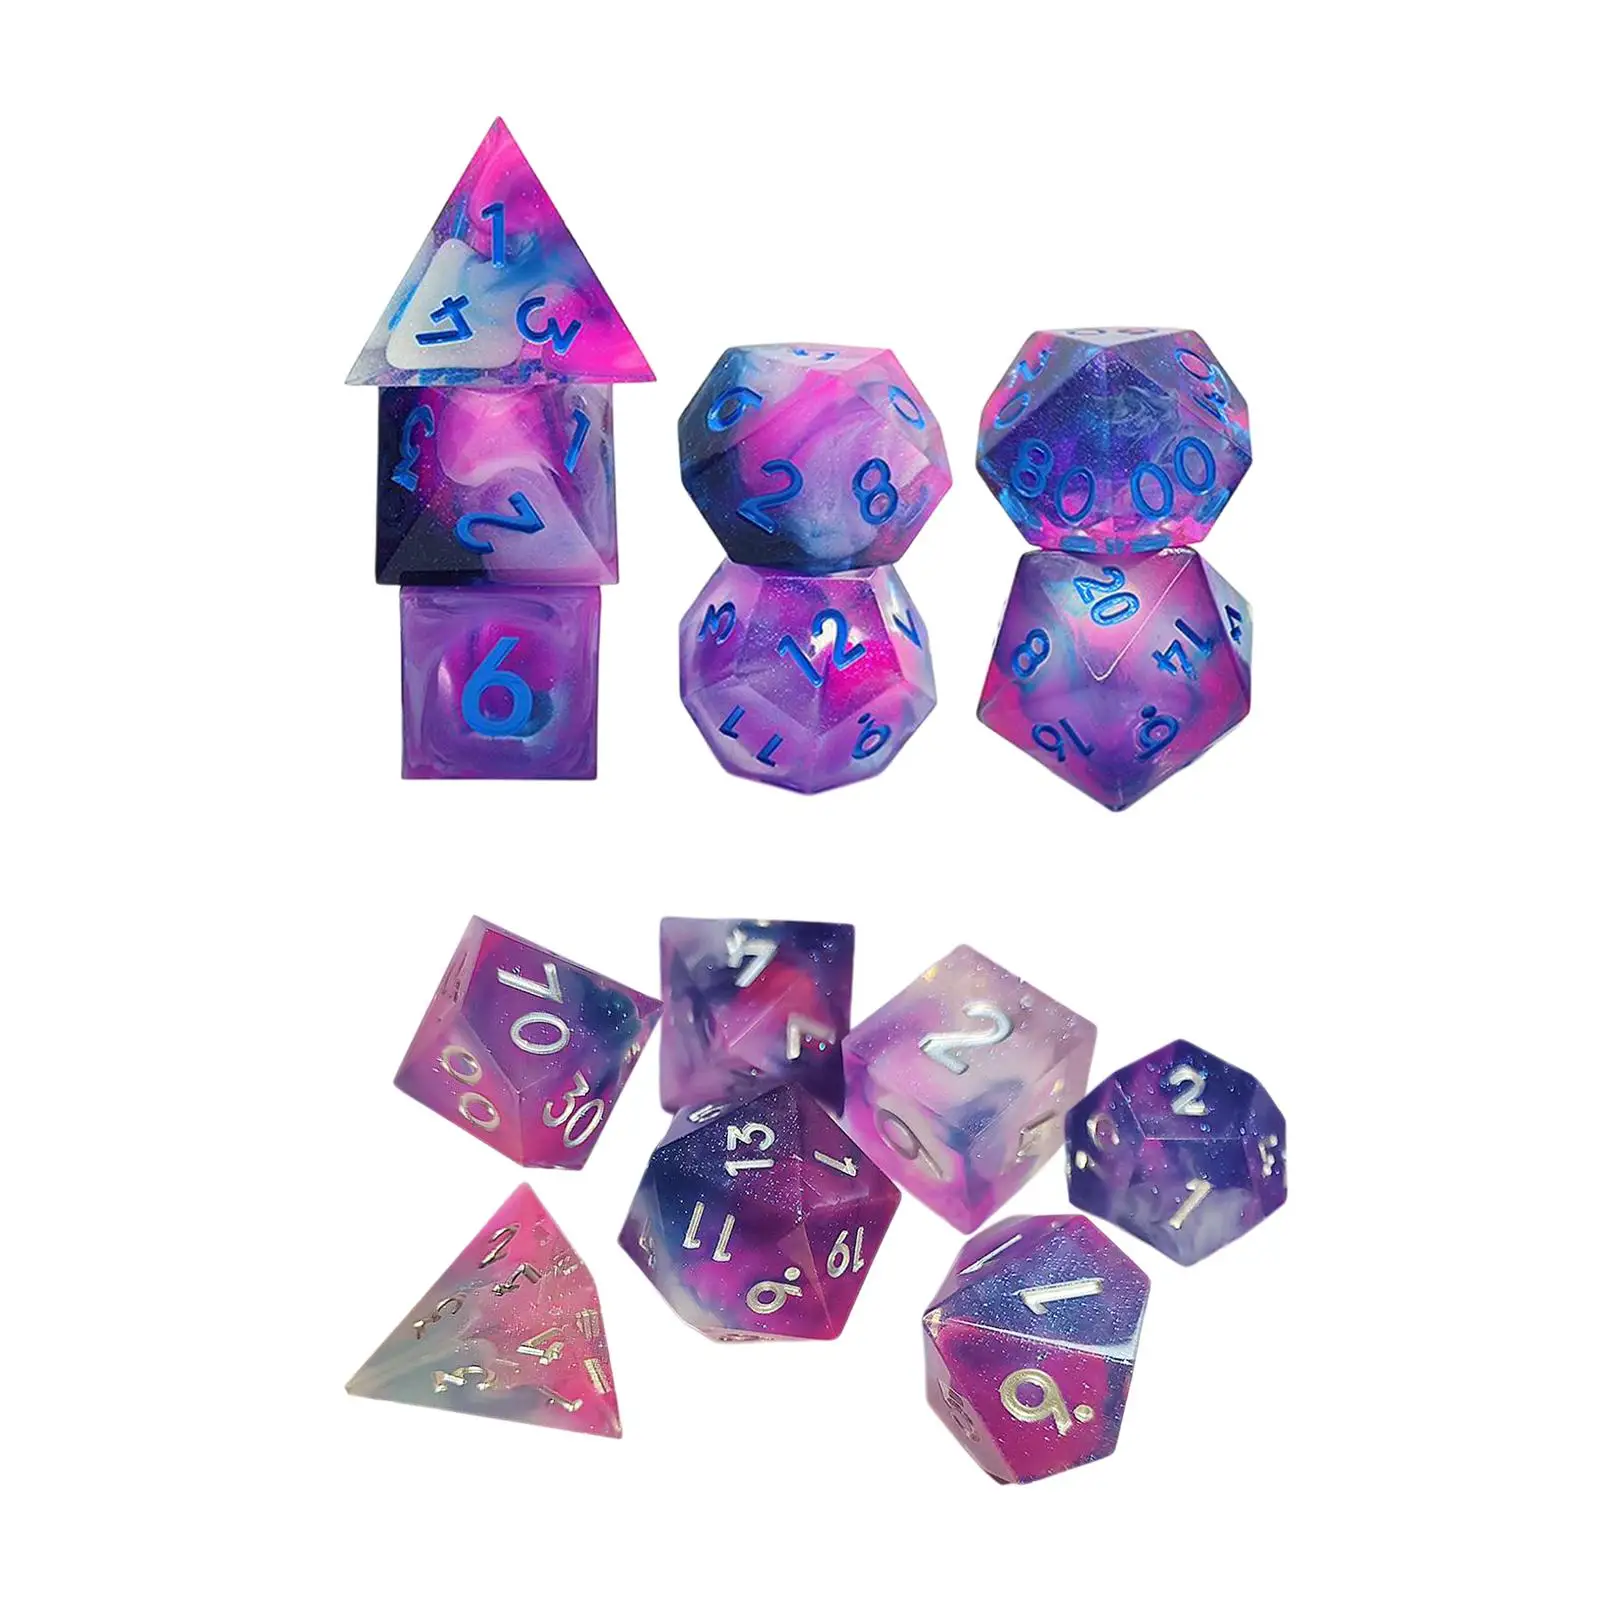 7x Multipurpose Polyhedral Dices Resistant Durable D8 D4 D10 D12 D20 Resin Game Dices for Board Game Props Table Games